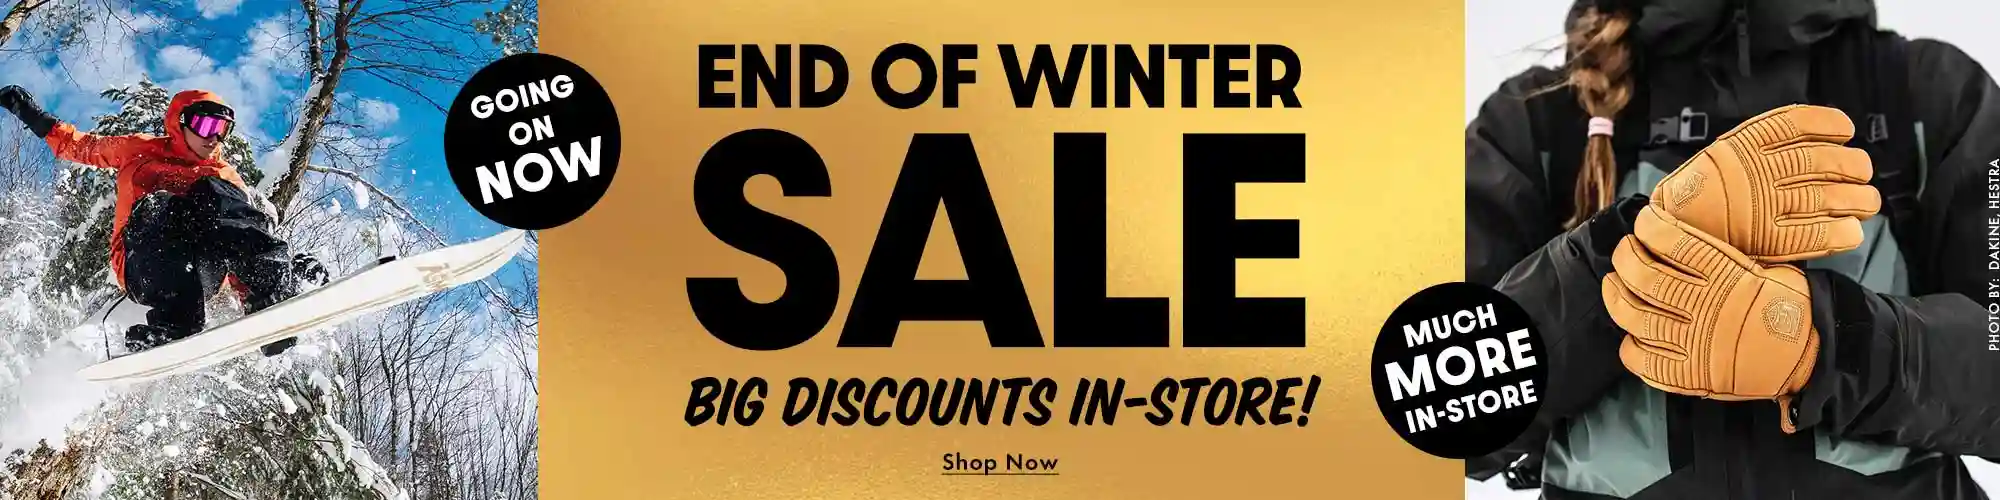 END OF WINTER SALE